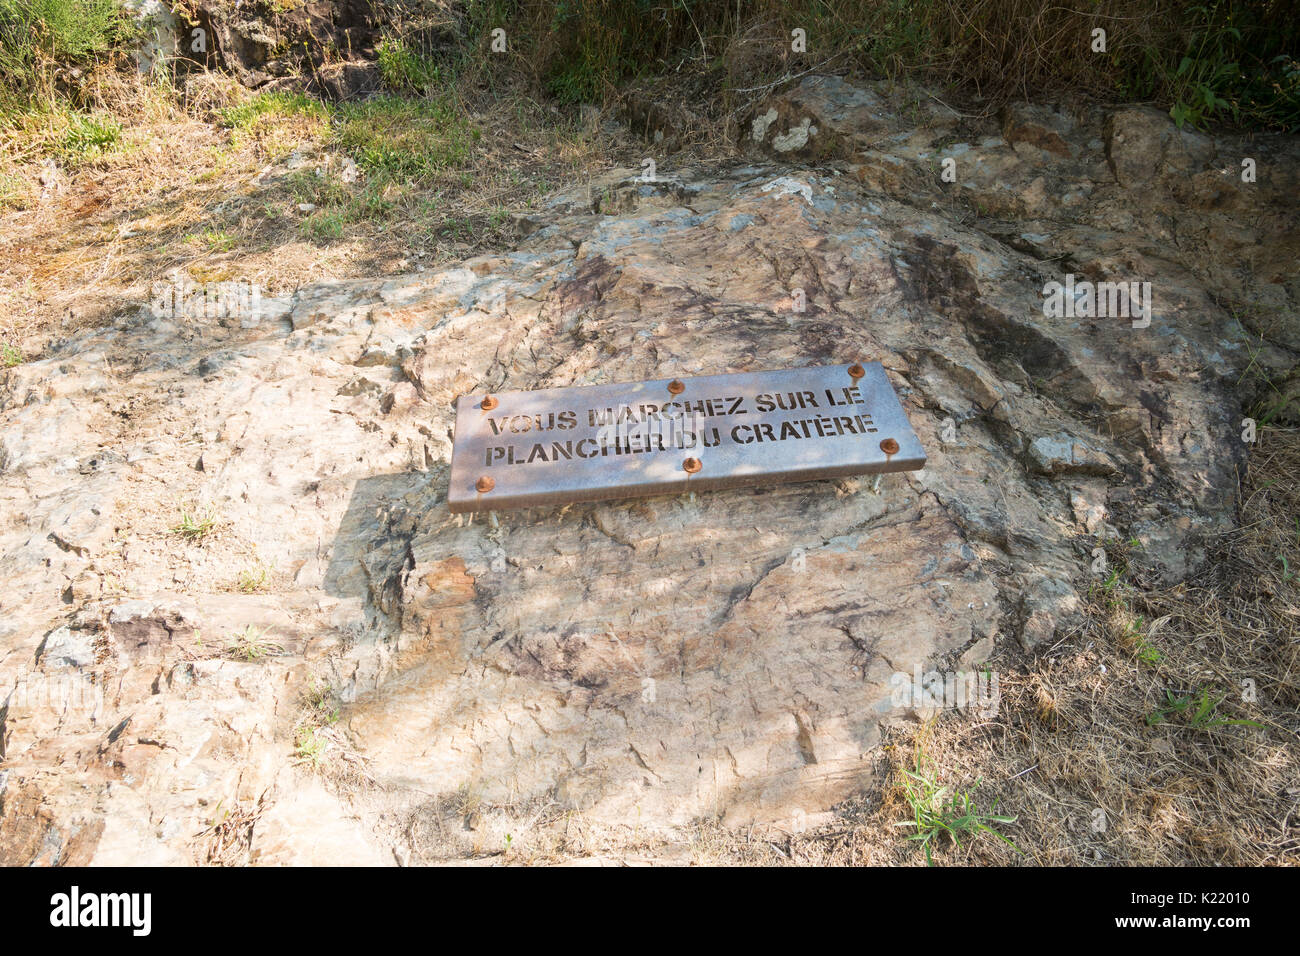 Floor of the crater caused by an asteroid impact, Rochechouart, Nouvelle-Aquitaine, France,Europe Stock Photo